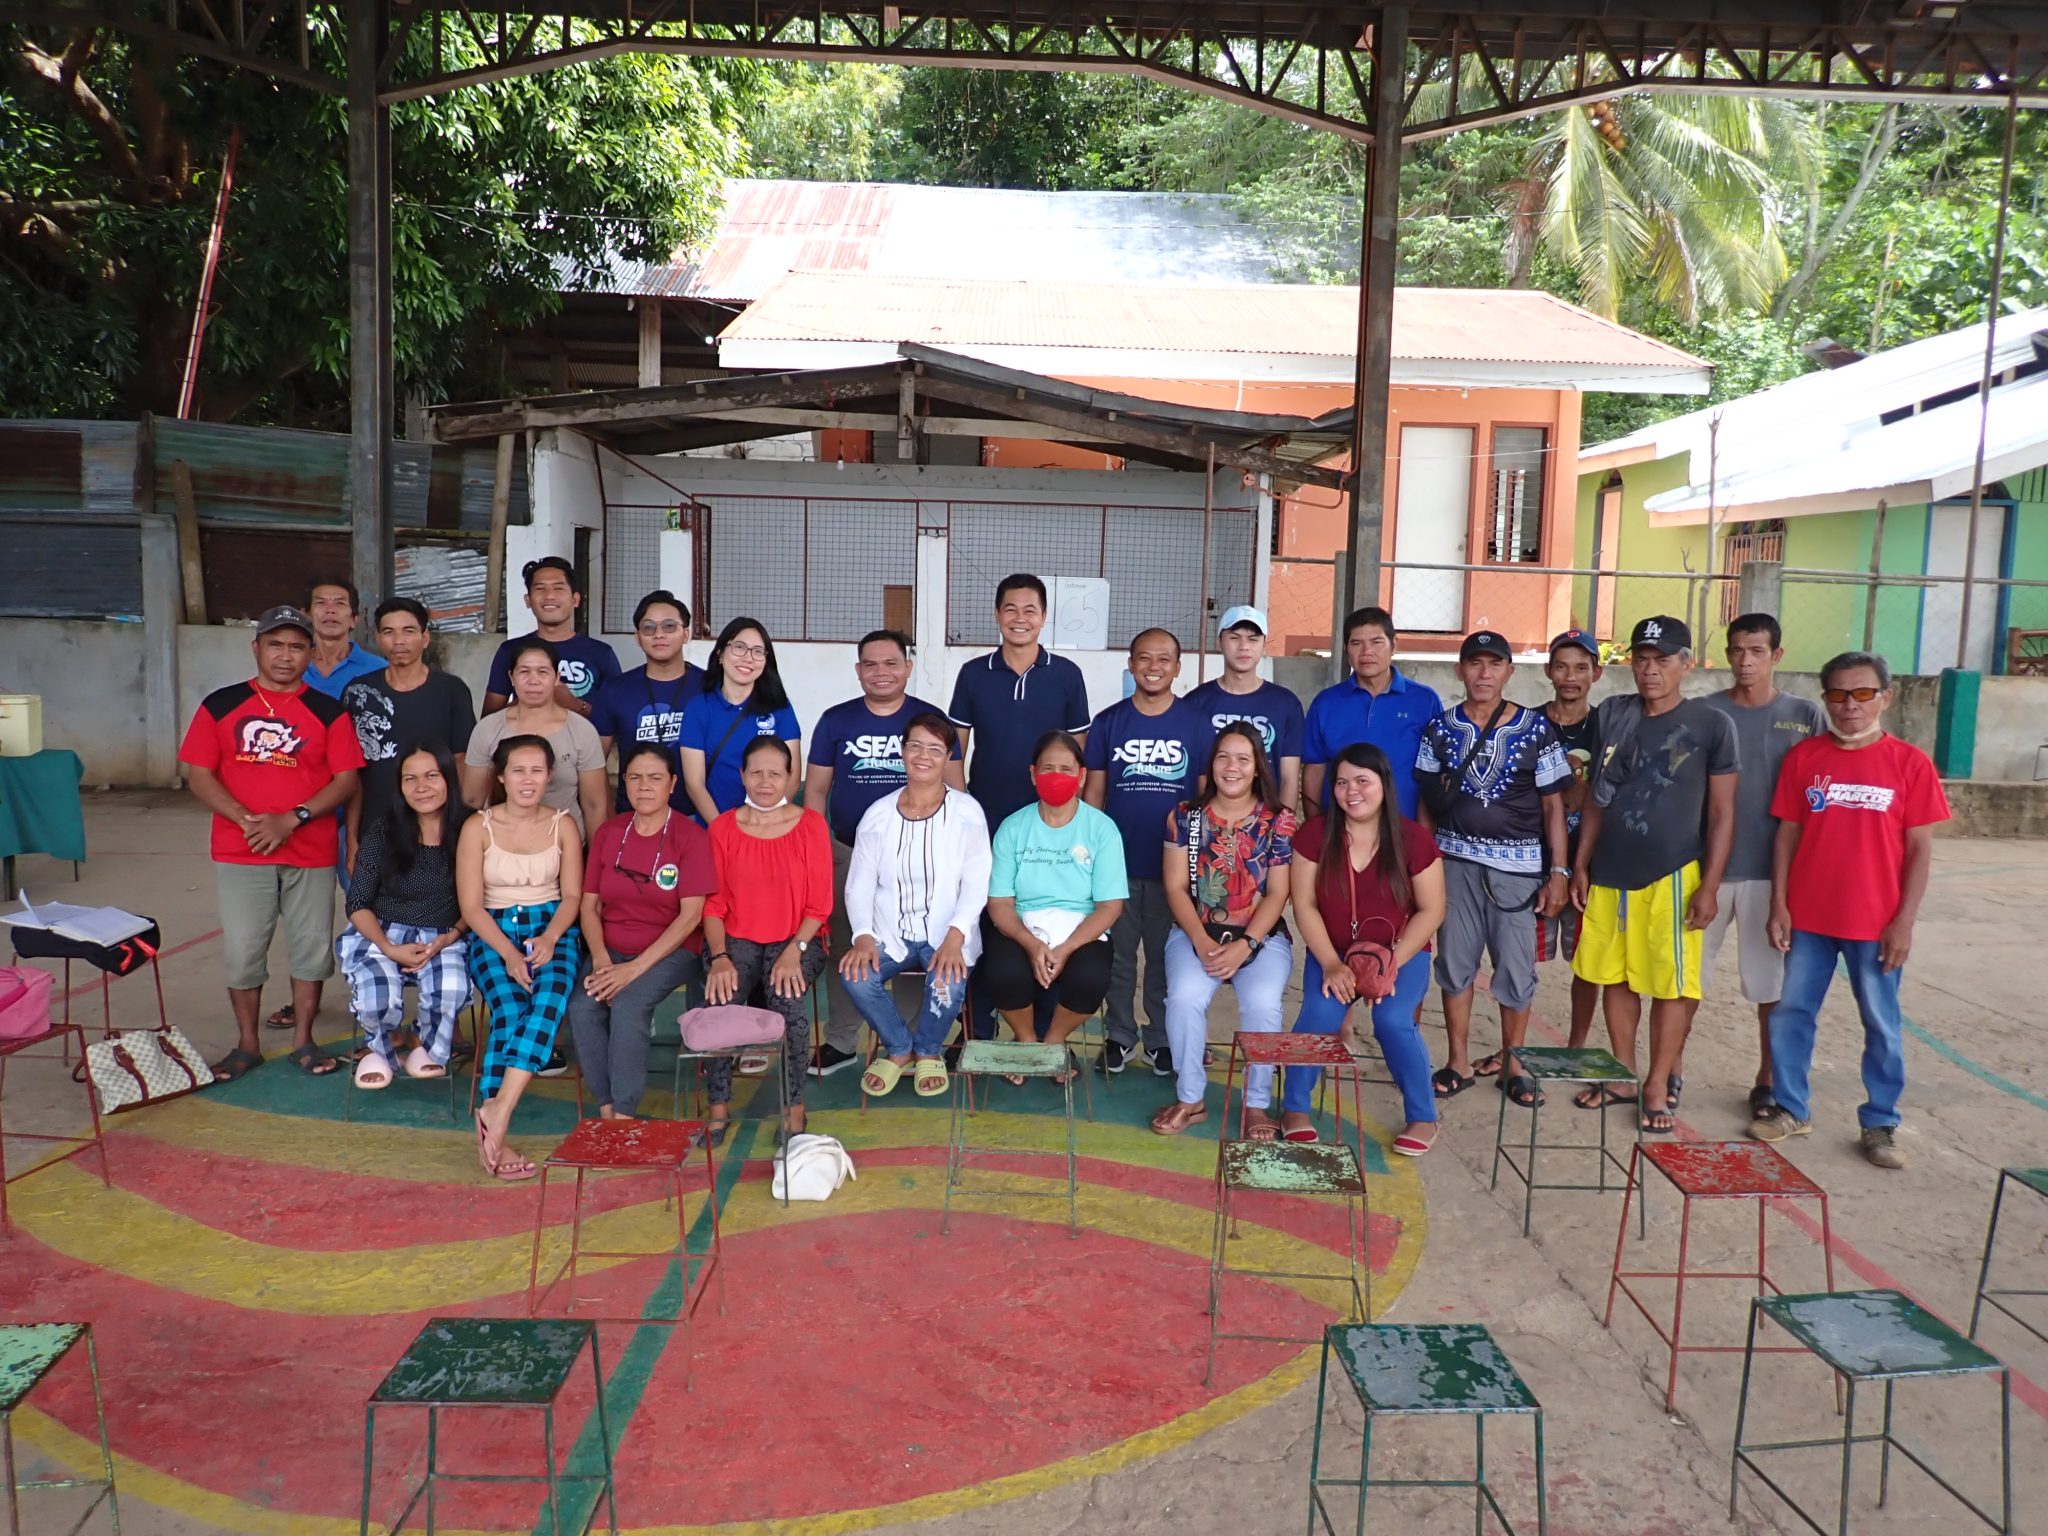 Project SEAS: Triple Impact for Fisheries Launched in Lower Cabancalan, Lazi, Siquijor